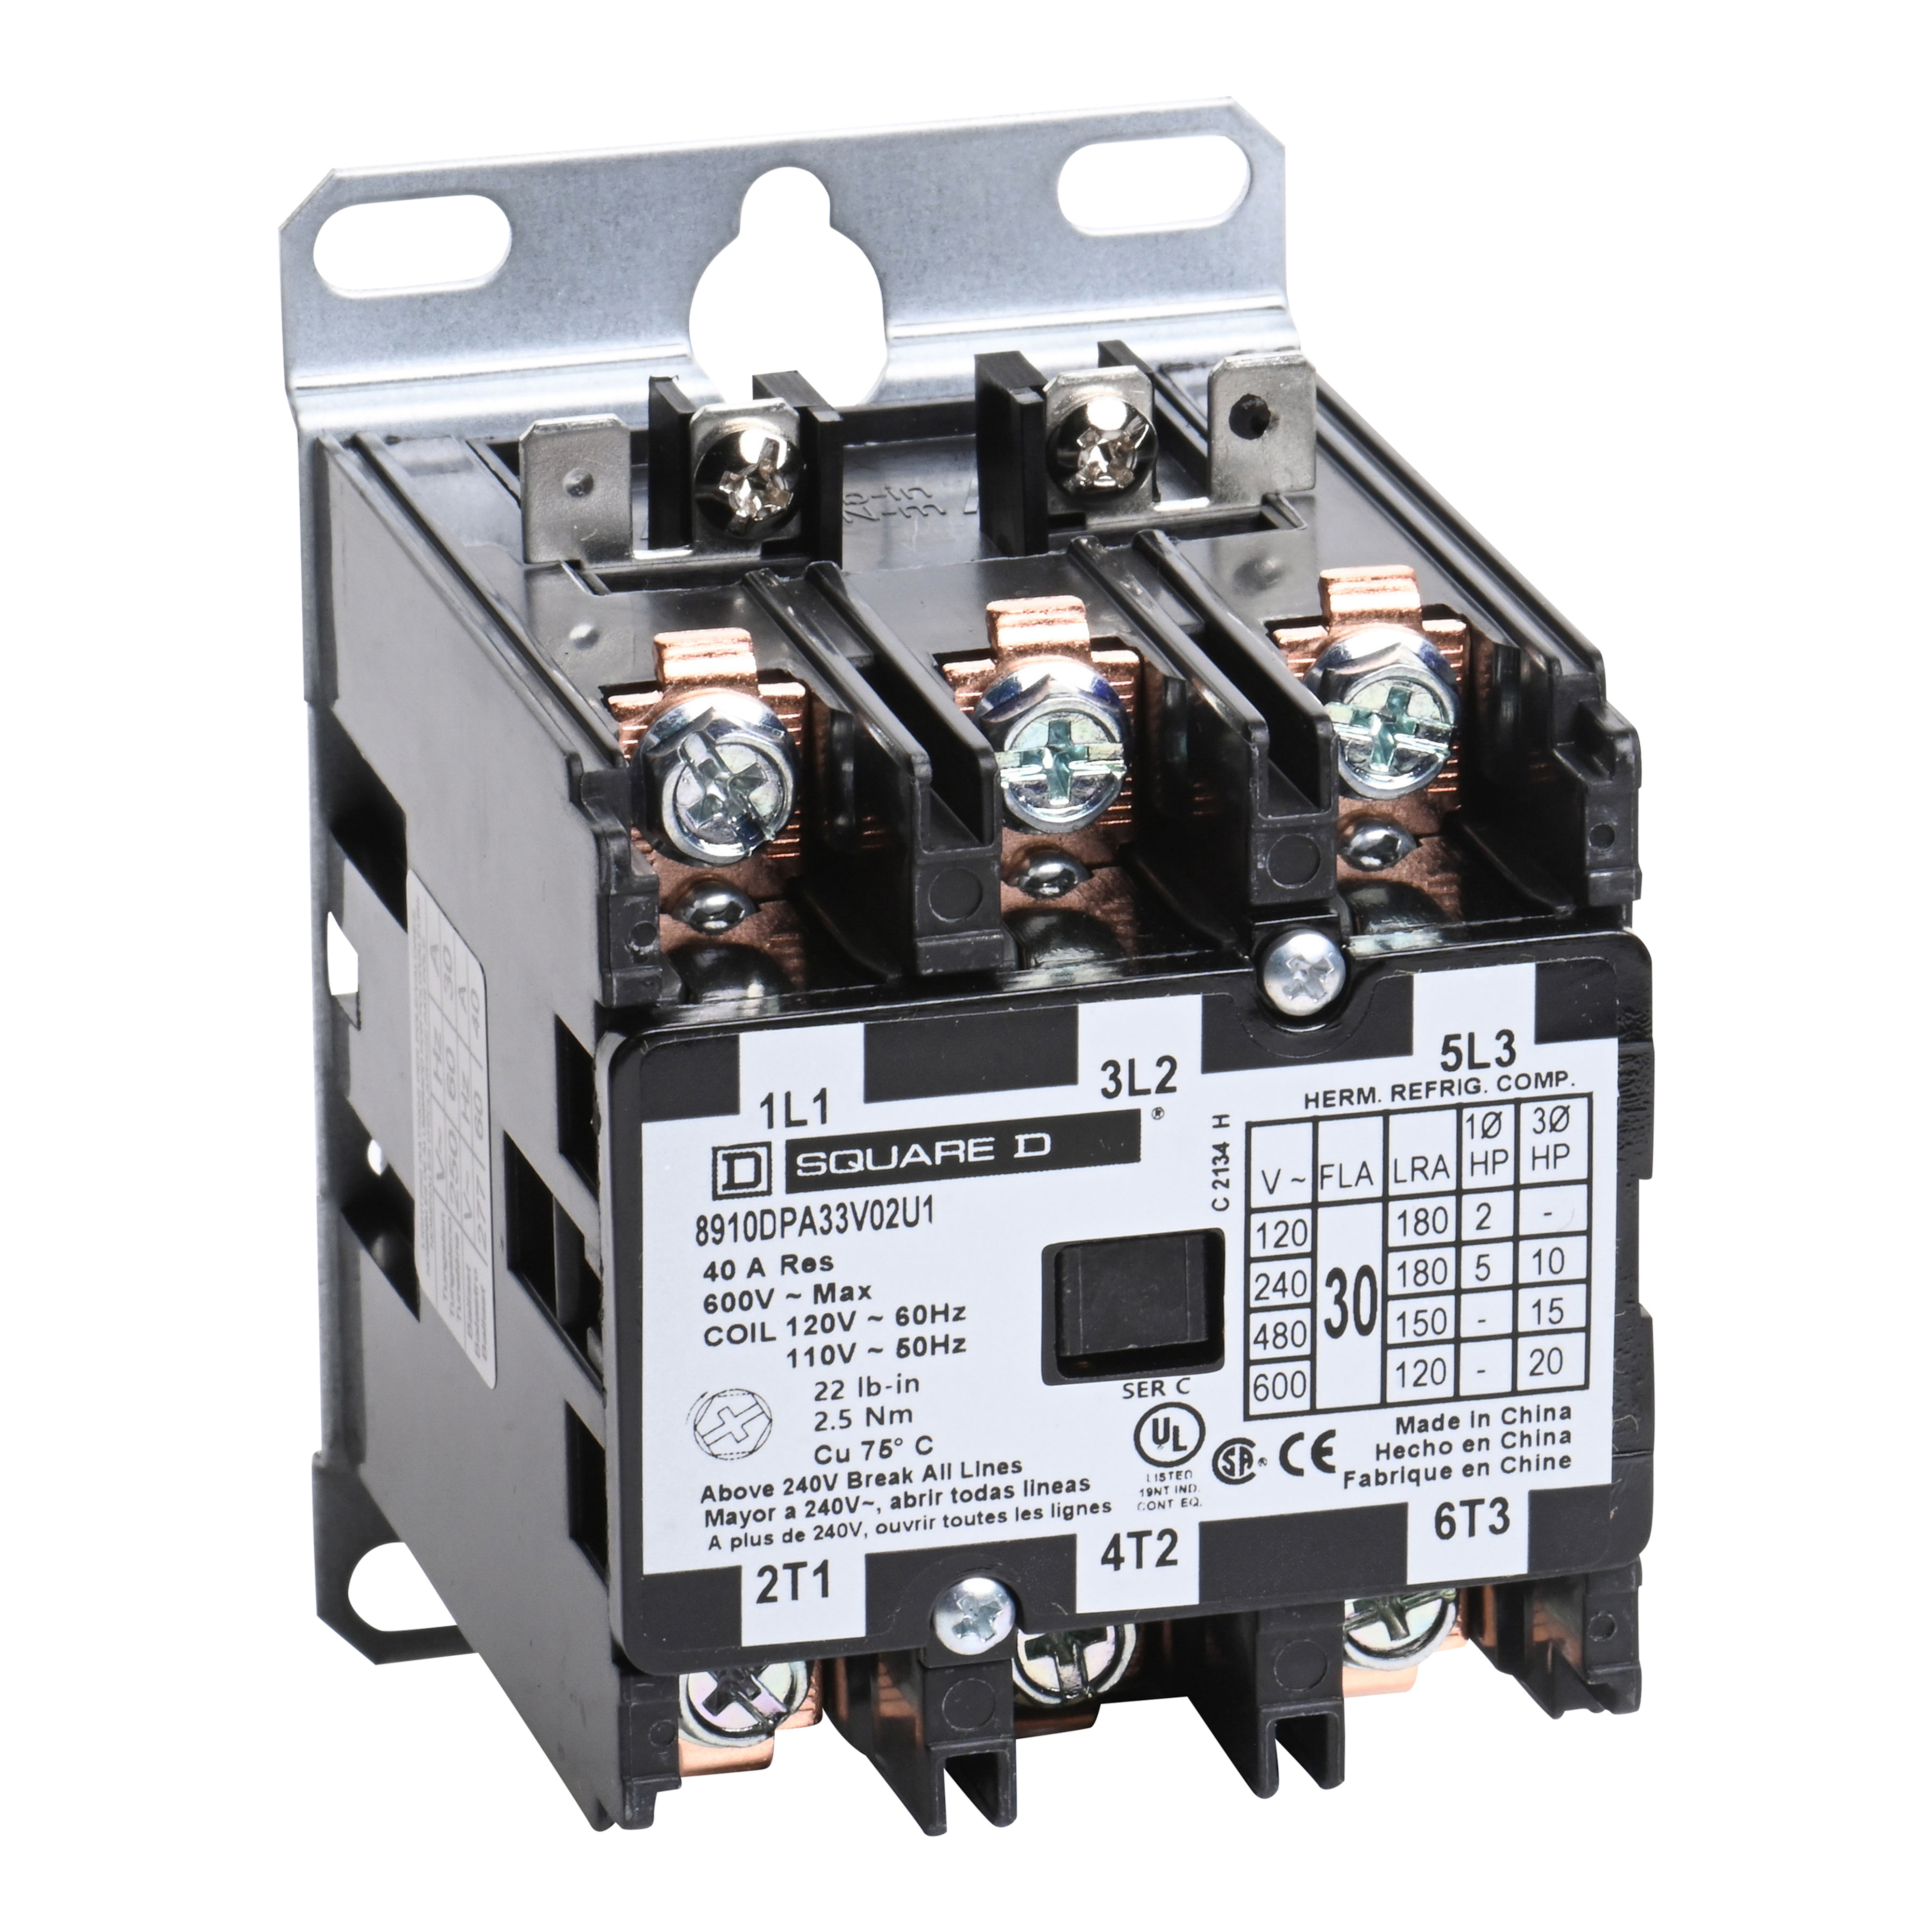 Contactor, Definite Purpose, 30A, 3 pole, 20HP at 575VAC, 3 phase, 110/120VAC 50/60Hz coil, open, UL Listed